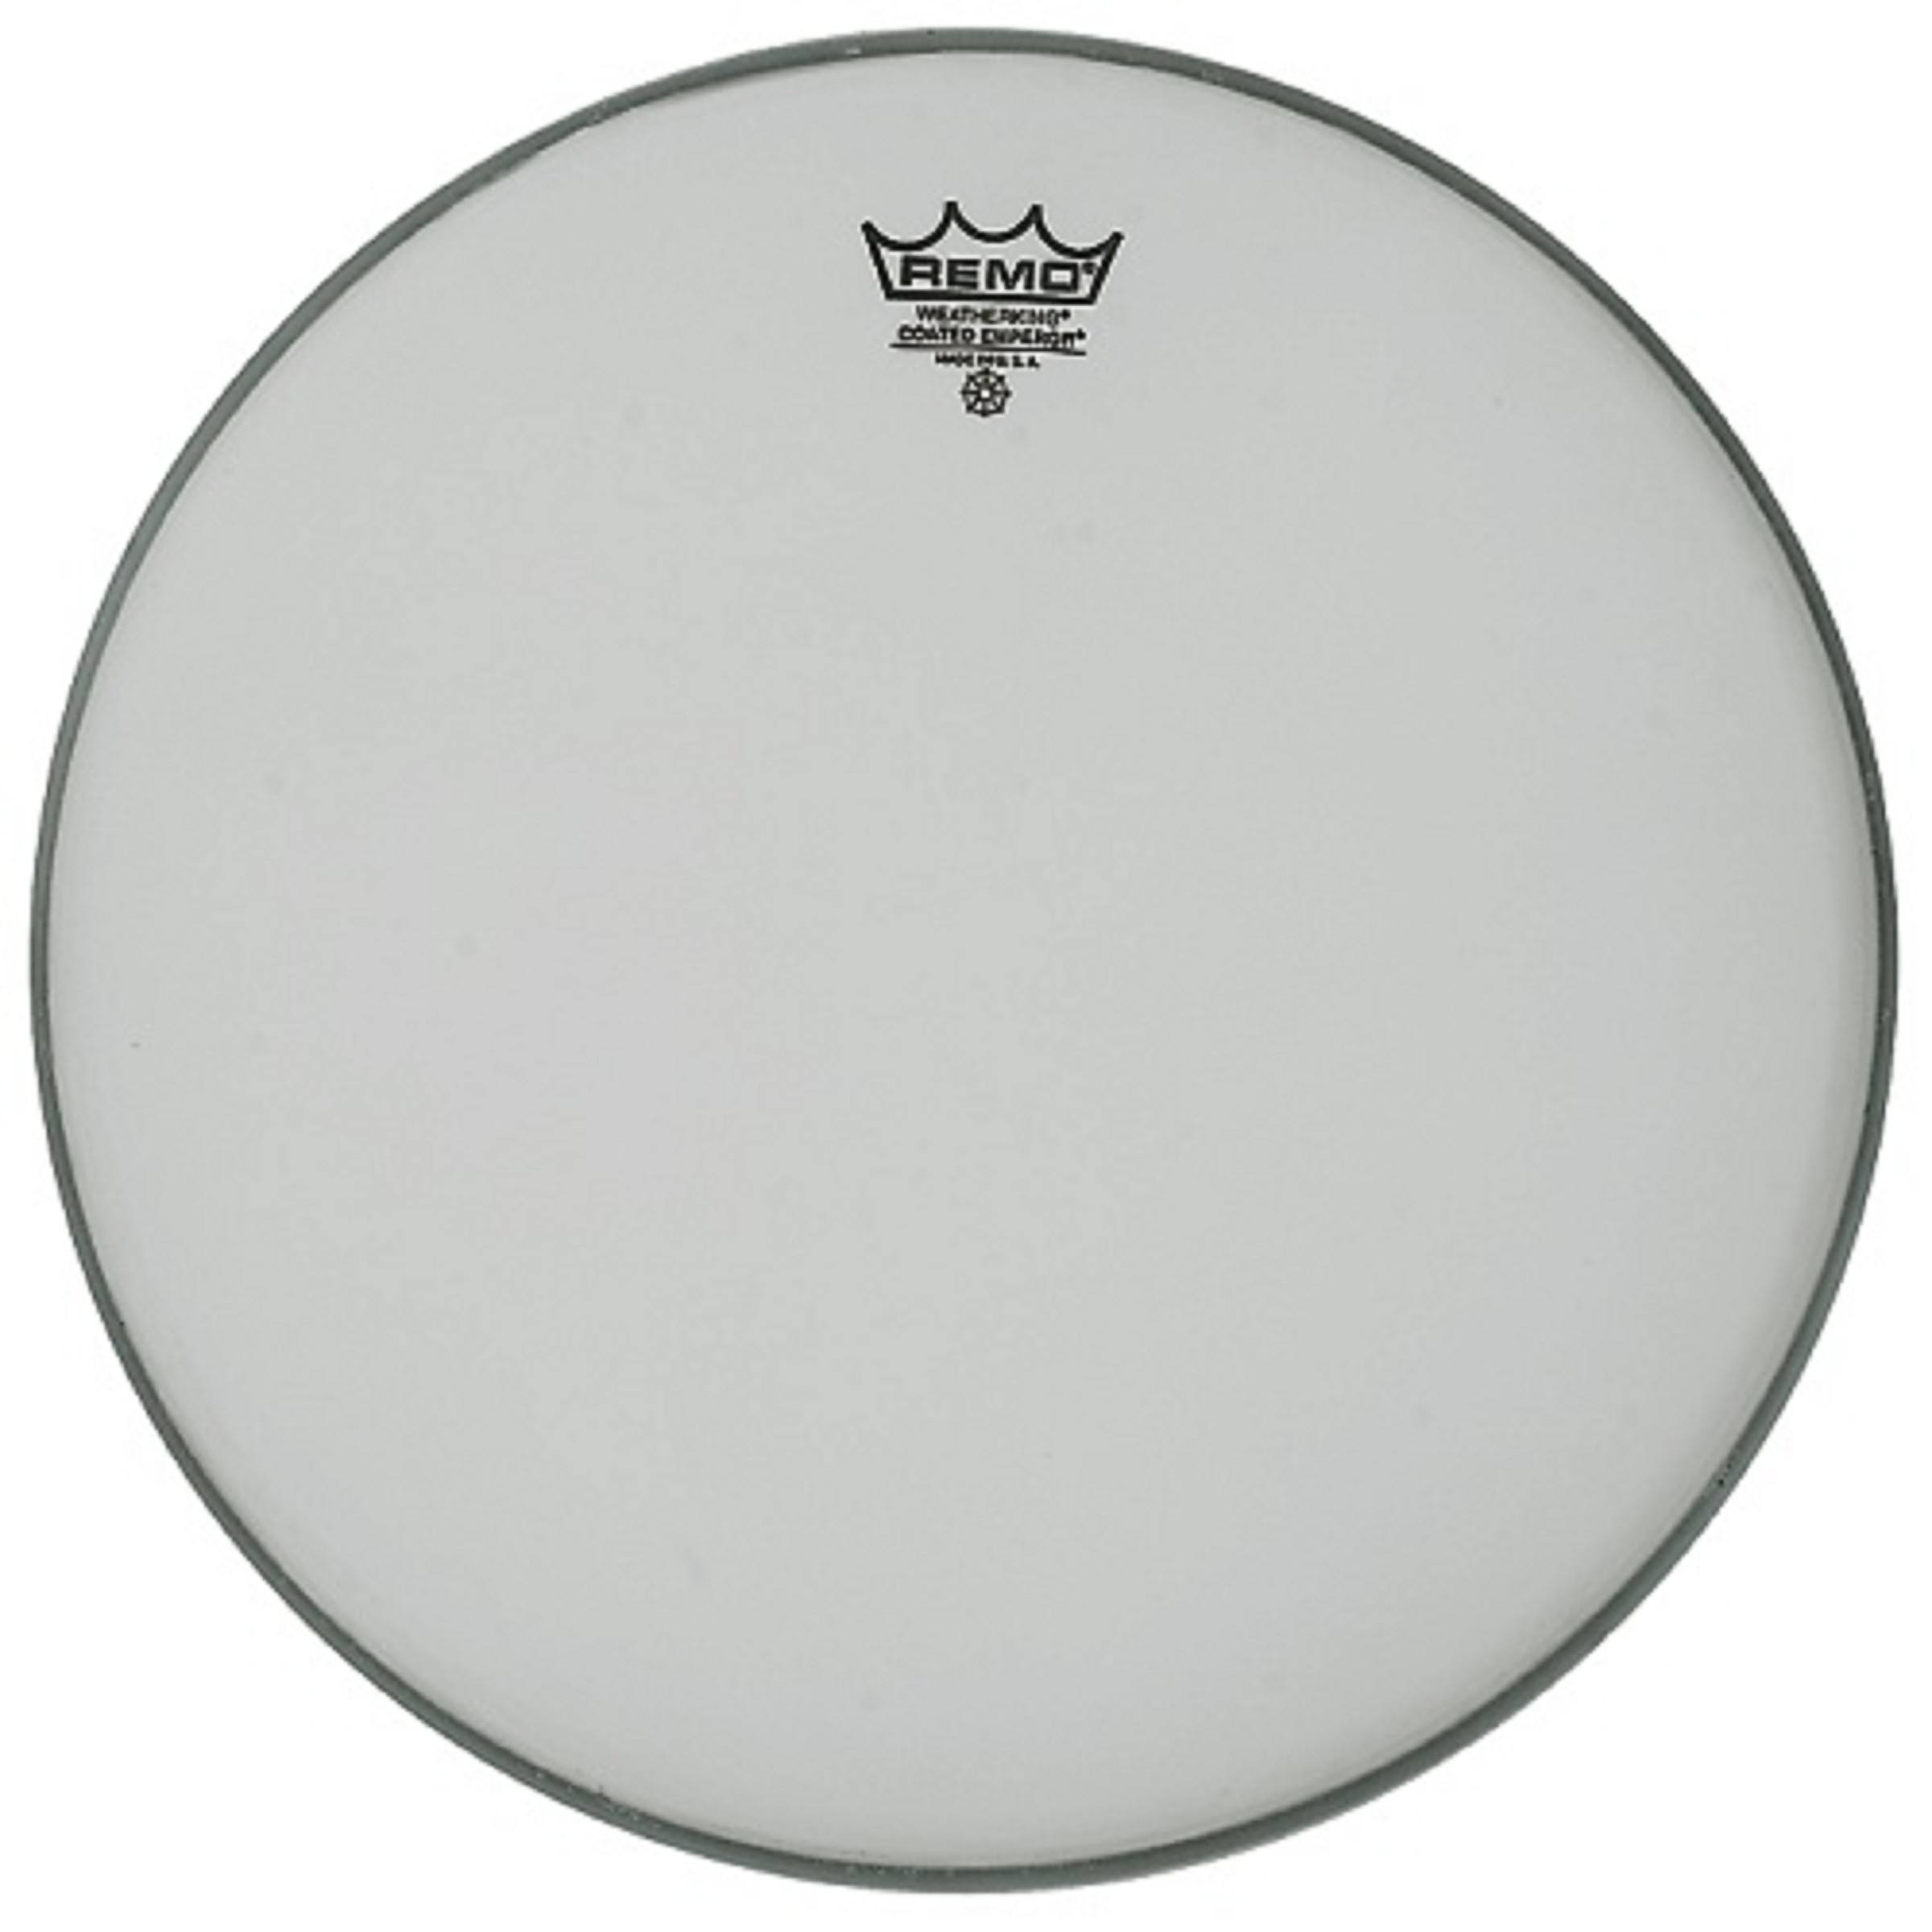 Remo Fell Emperor 10" Coated